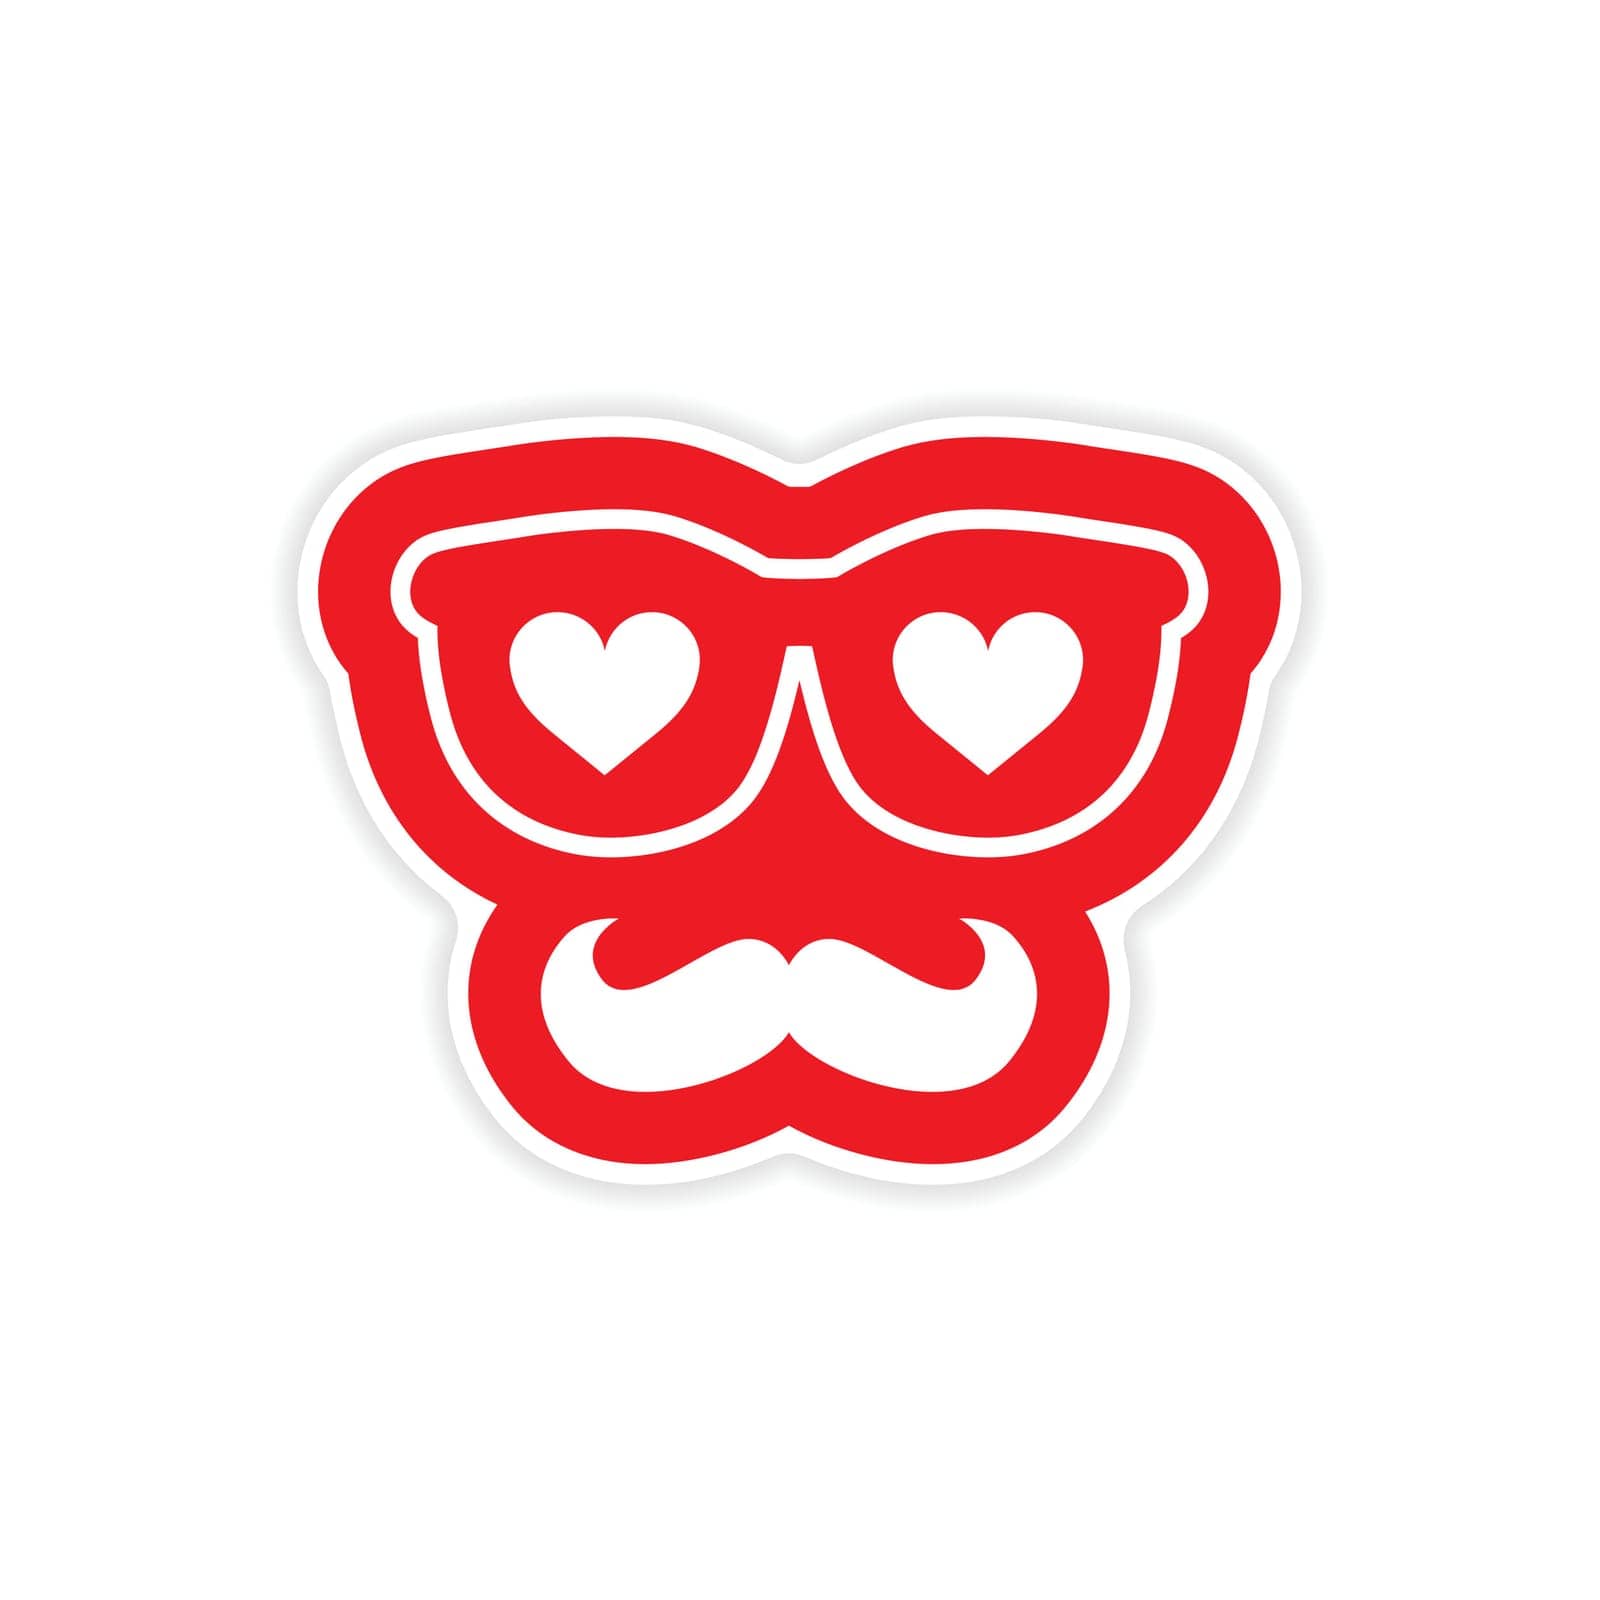 love,symbol,whisker,happy,greeting,pattern,hipster,wear,holiday,mustache,glasses,white,paper,design,wayfarer,day,shape,old,sticker,valentine,fashionable,heart,conceptual,stylish,background,vintage,silhouette,style,accessory,fashion by ogqcorp